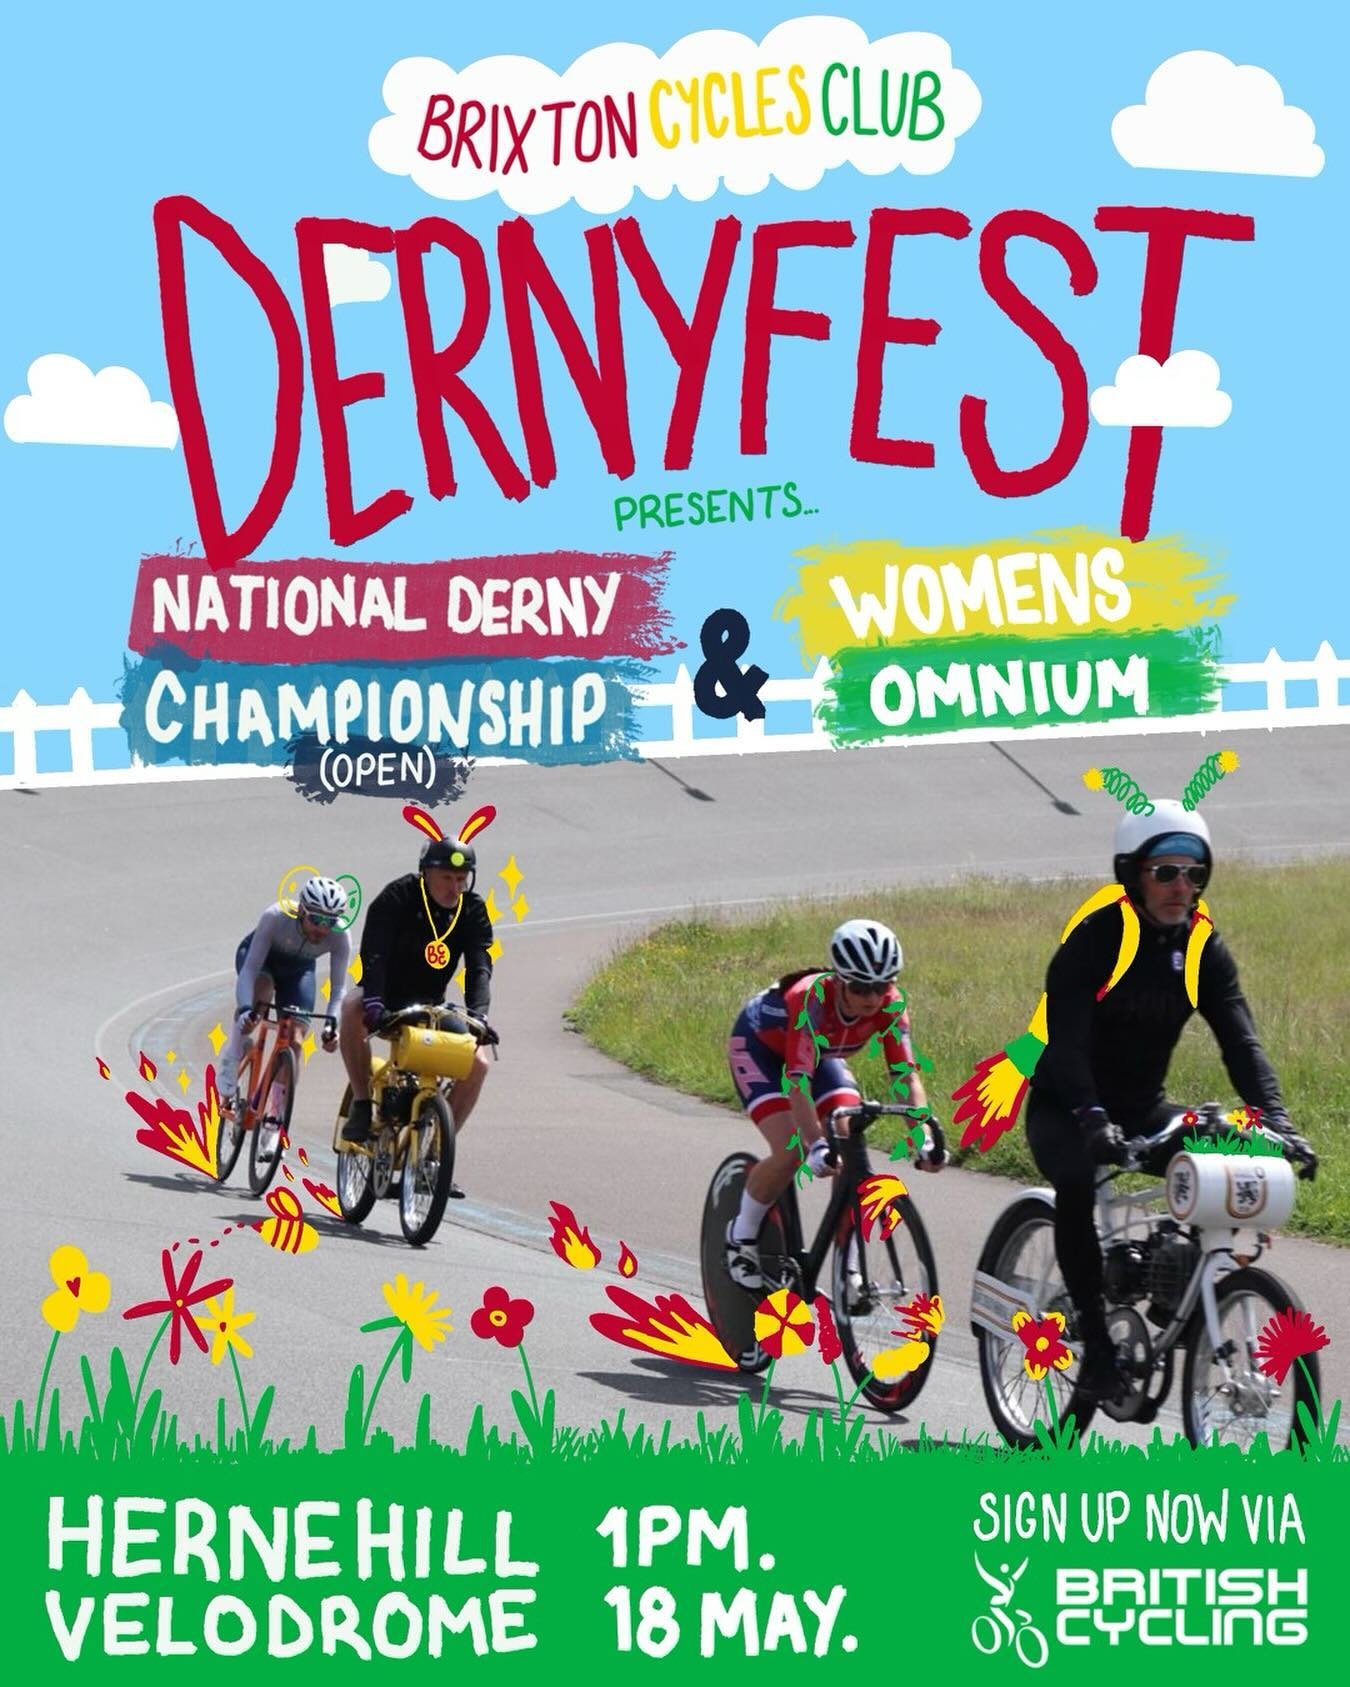 START YOUR MFn LAWNMOWER ENGINES

BRIXTON CYCLES&rsquo; DERNYFEST PRESENTS:

2024 BRITISH NATIONAL OPEN DERNY CHAMPS

WOMENS OMNIUM

18TH MAY

SPACES LEFT. SIGN UP NOW TO SECURE YOUR SPACE ASAP

Shout out to @bry.s for the artwork

#trackcycling #lon